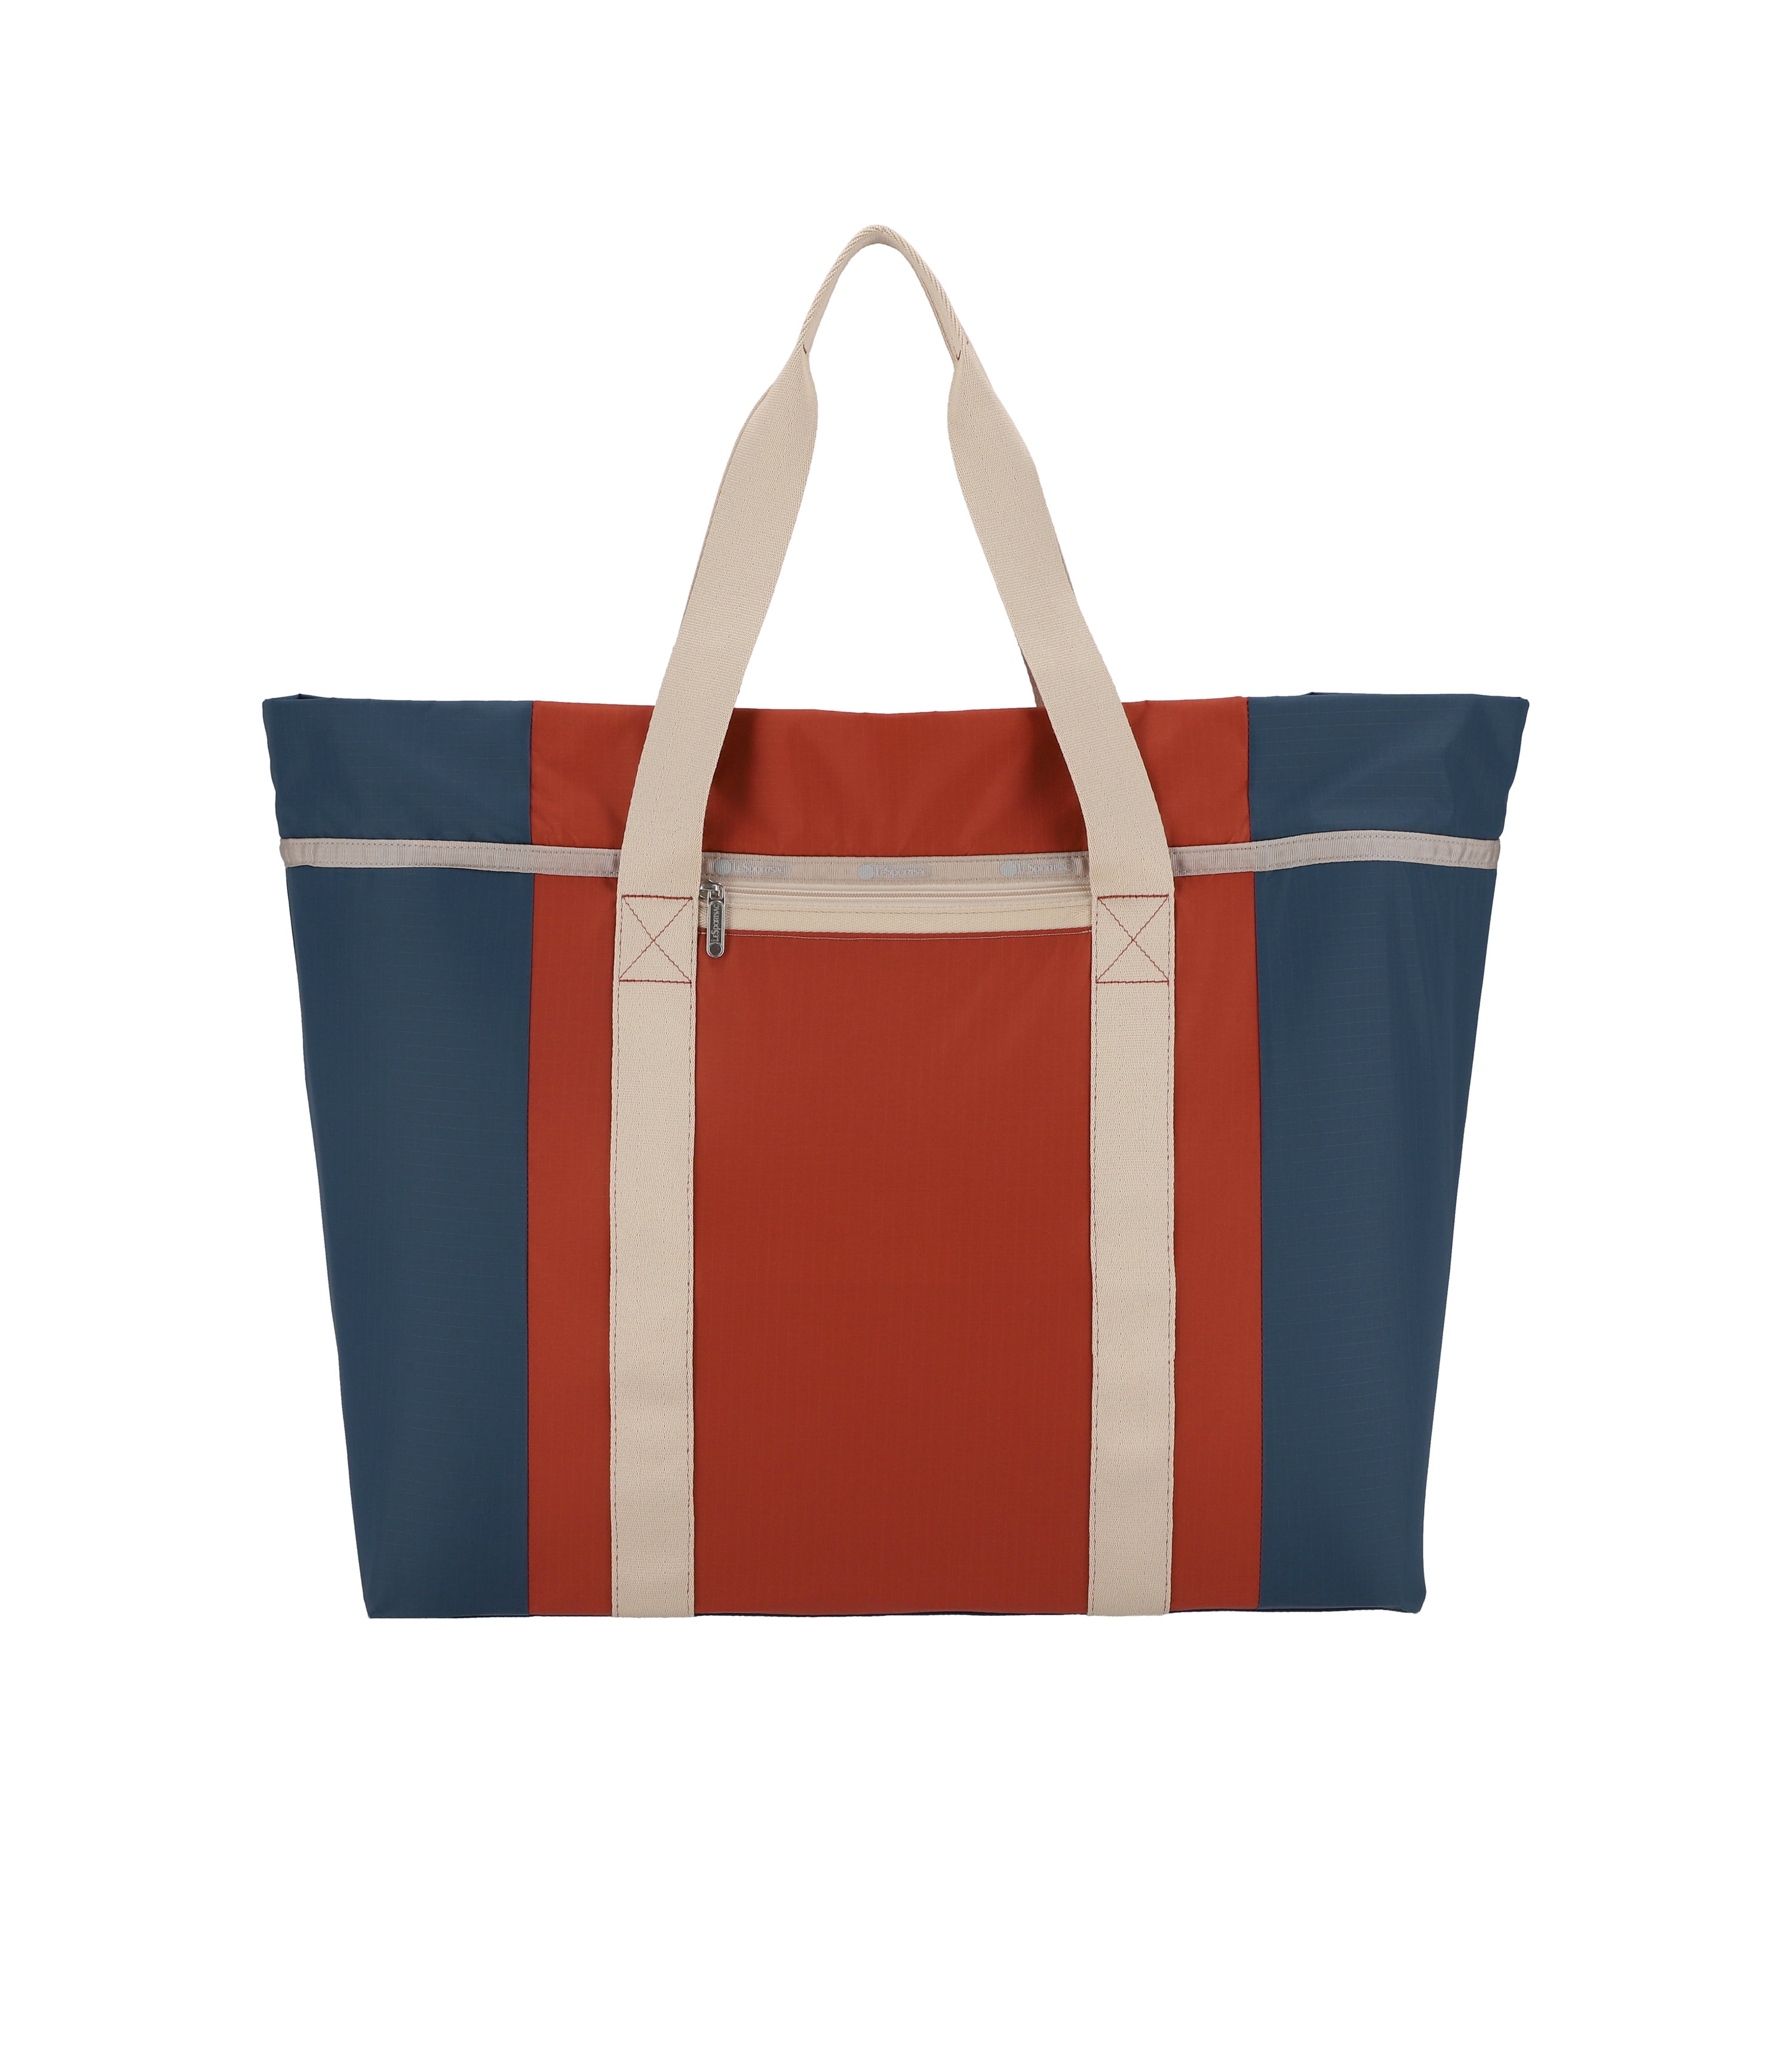 Lightweight Travel Tote Bags  Durable and Sporty Totes by LeSportsac